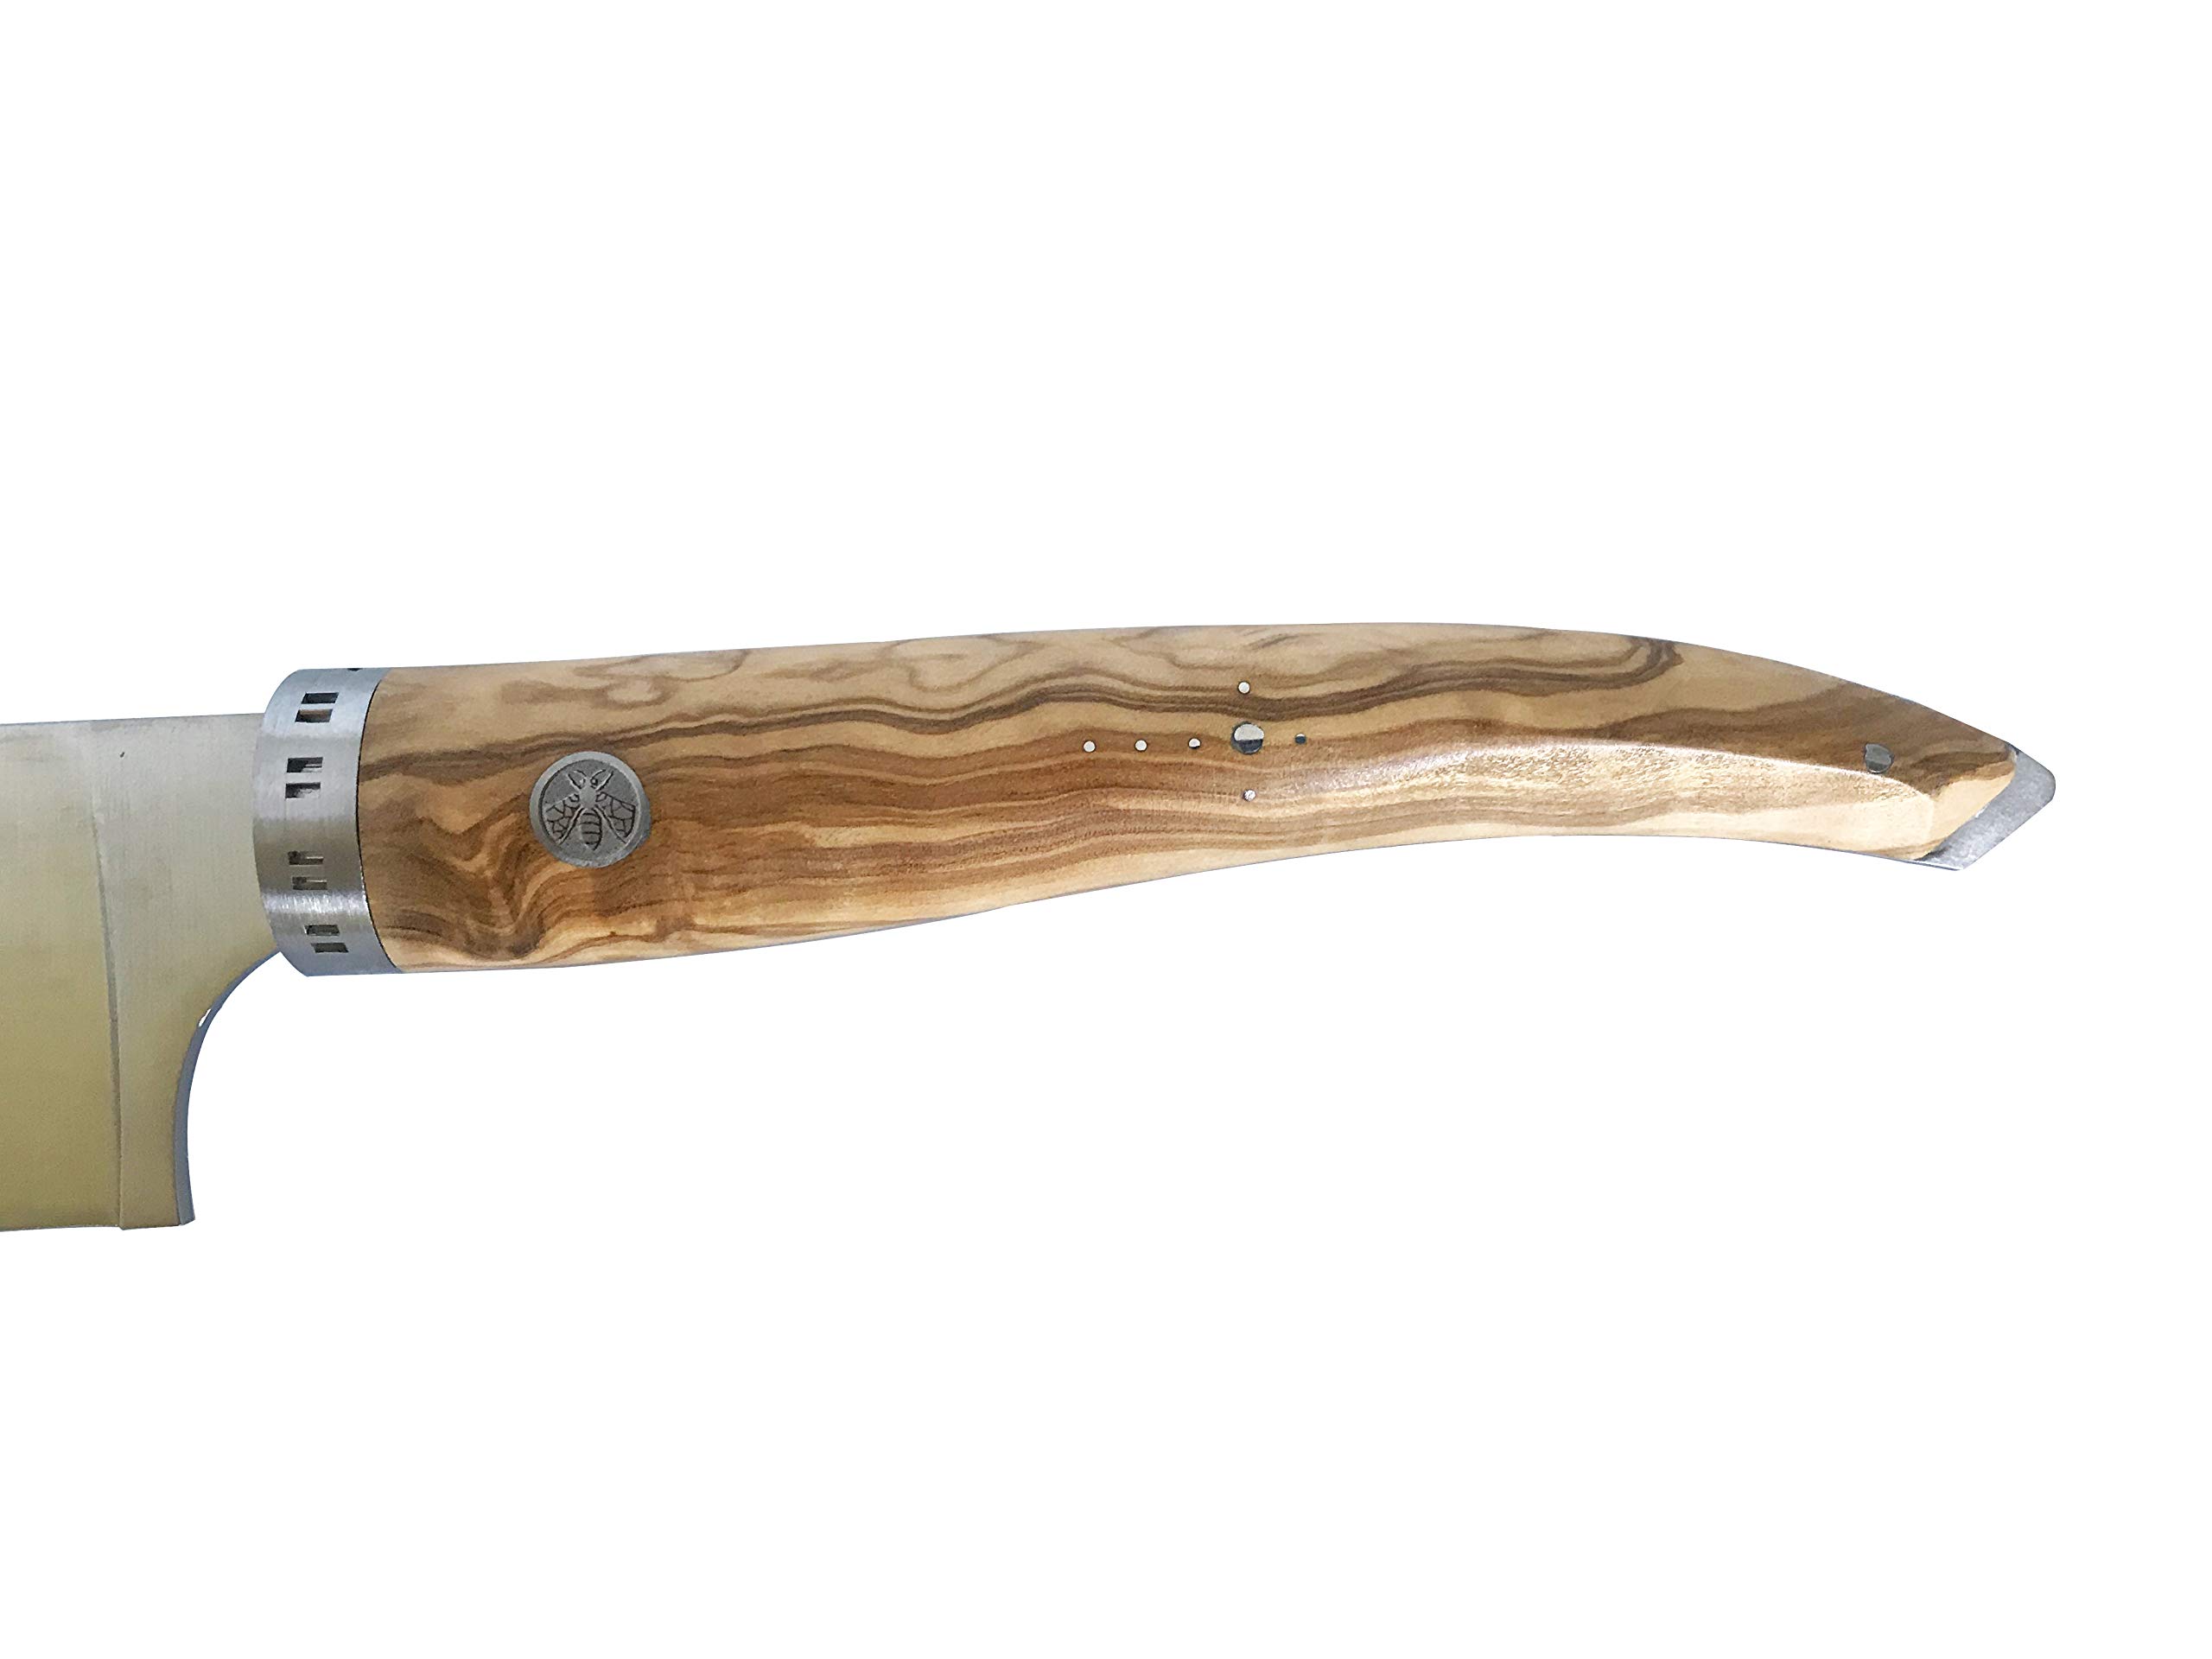 Laguiole en Aubrac Cuisine Gourmet Stainless Fully Forged Steel Made In France Cook's Chef 's Knife With Olivewood Handle, 9-in / 23cm